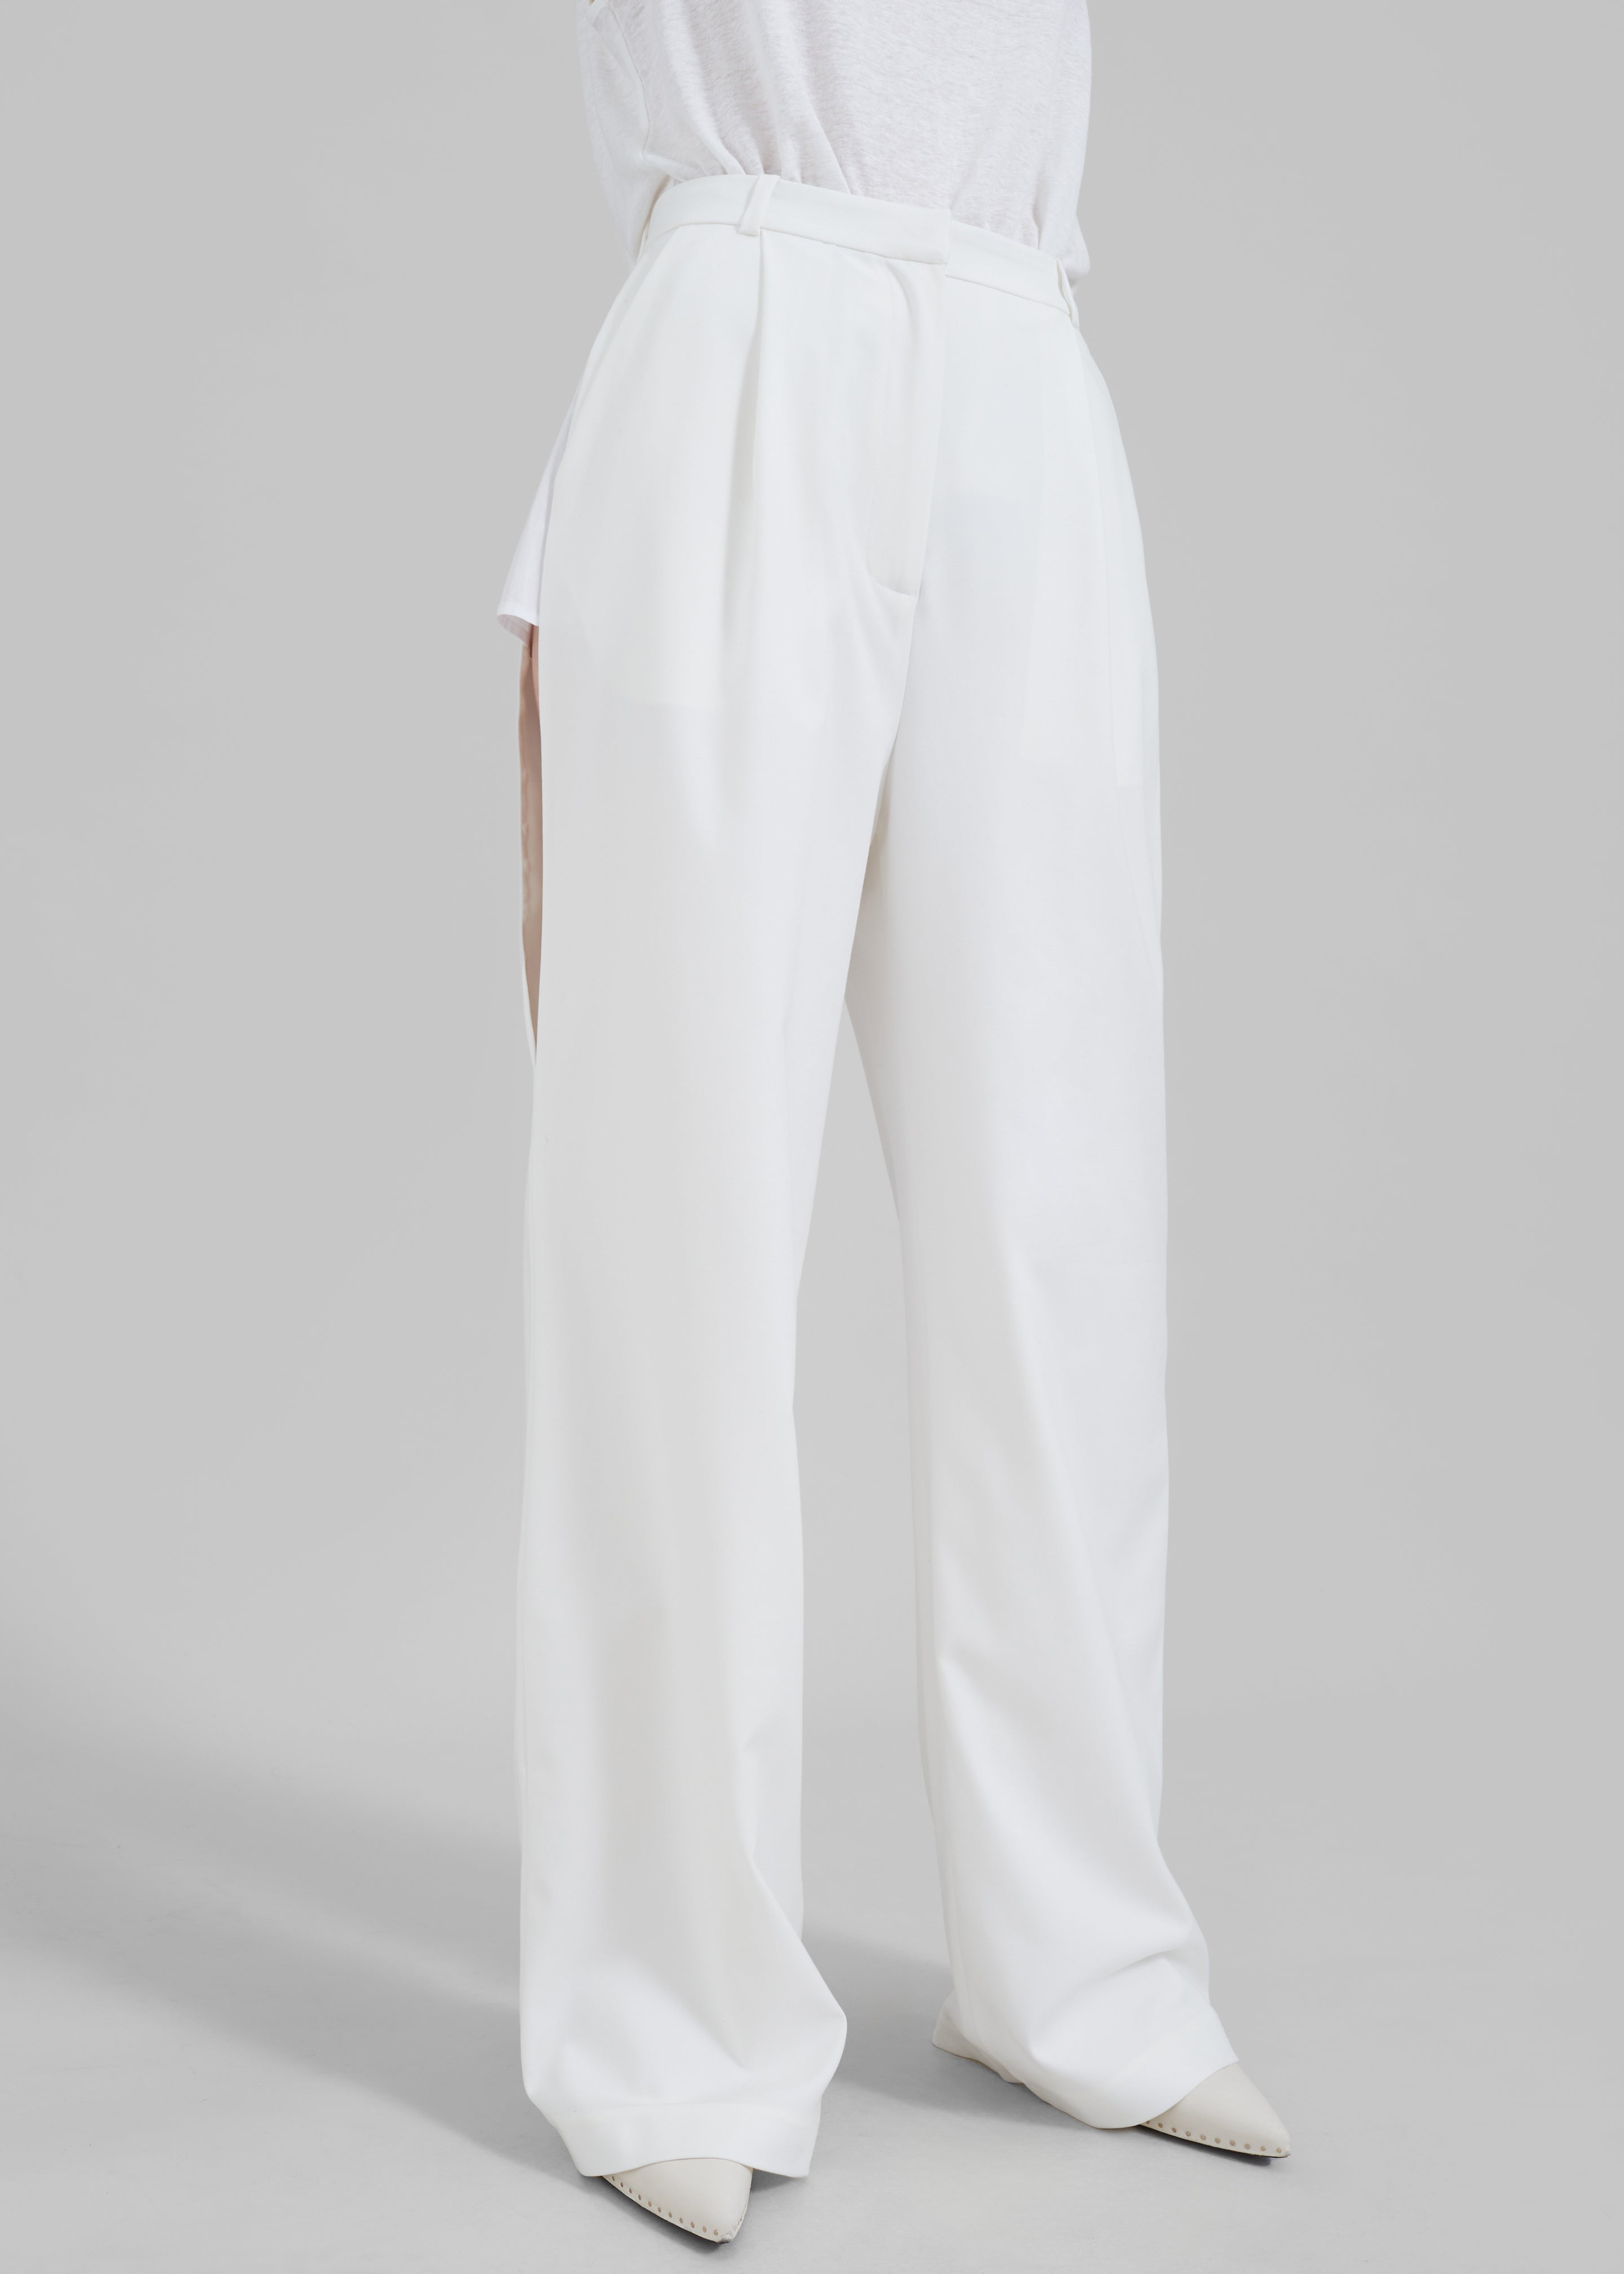 Bevza Trousers With Slits - Ivory - 2